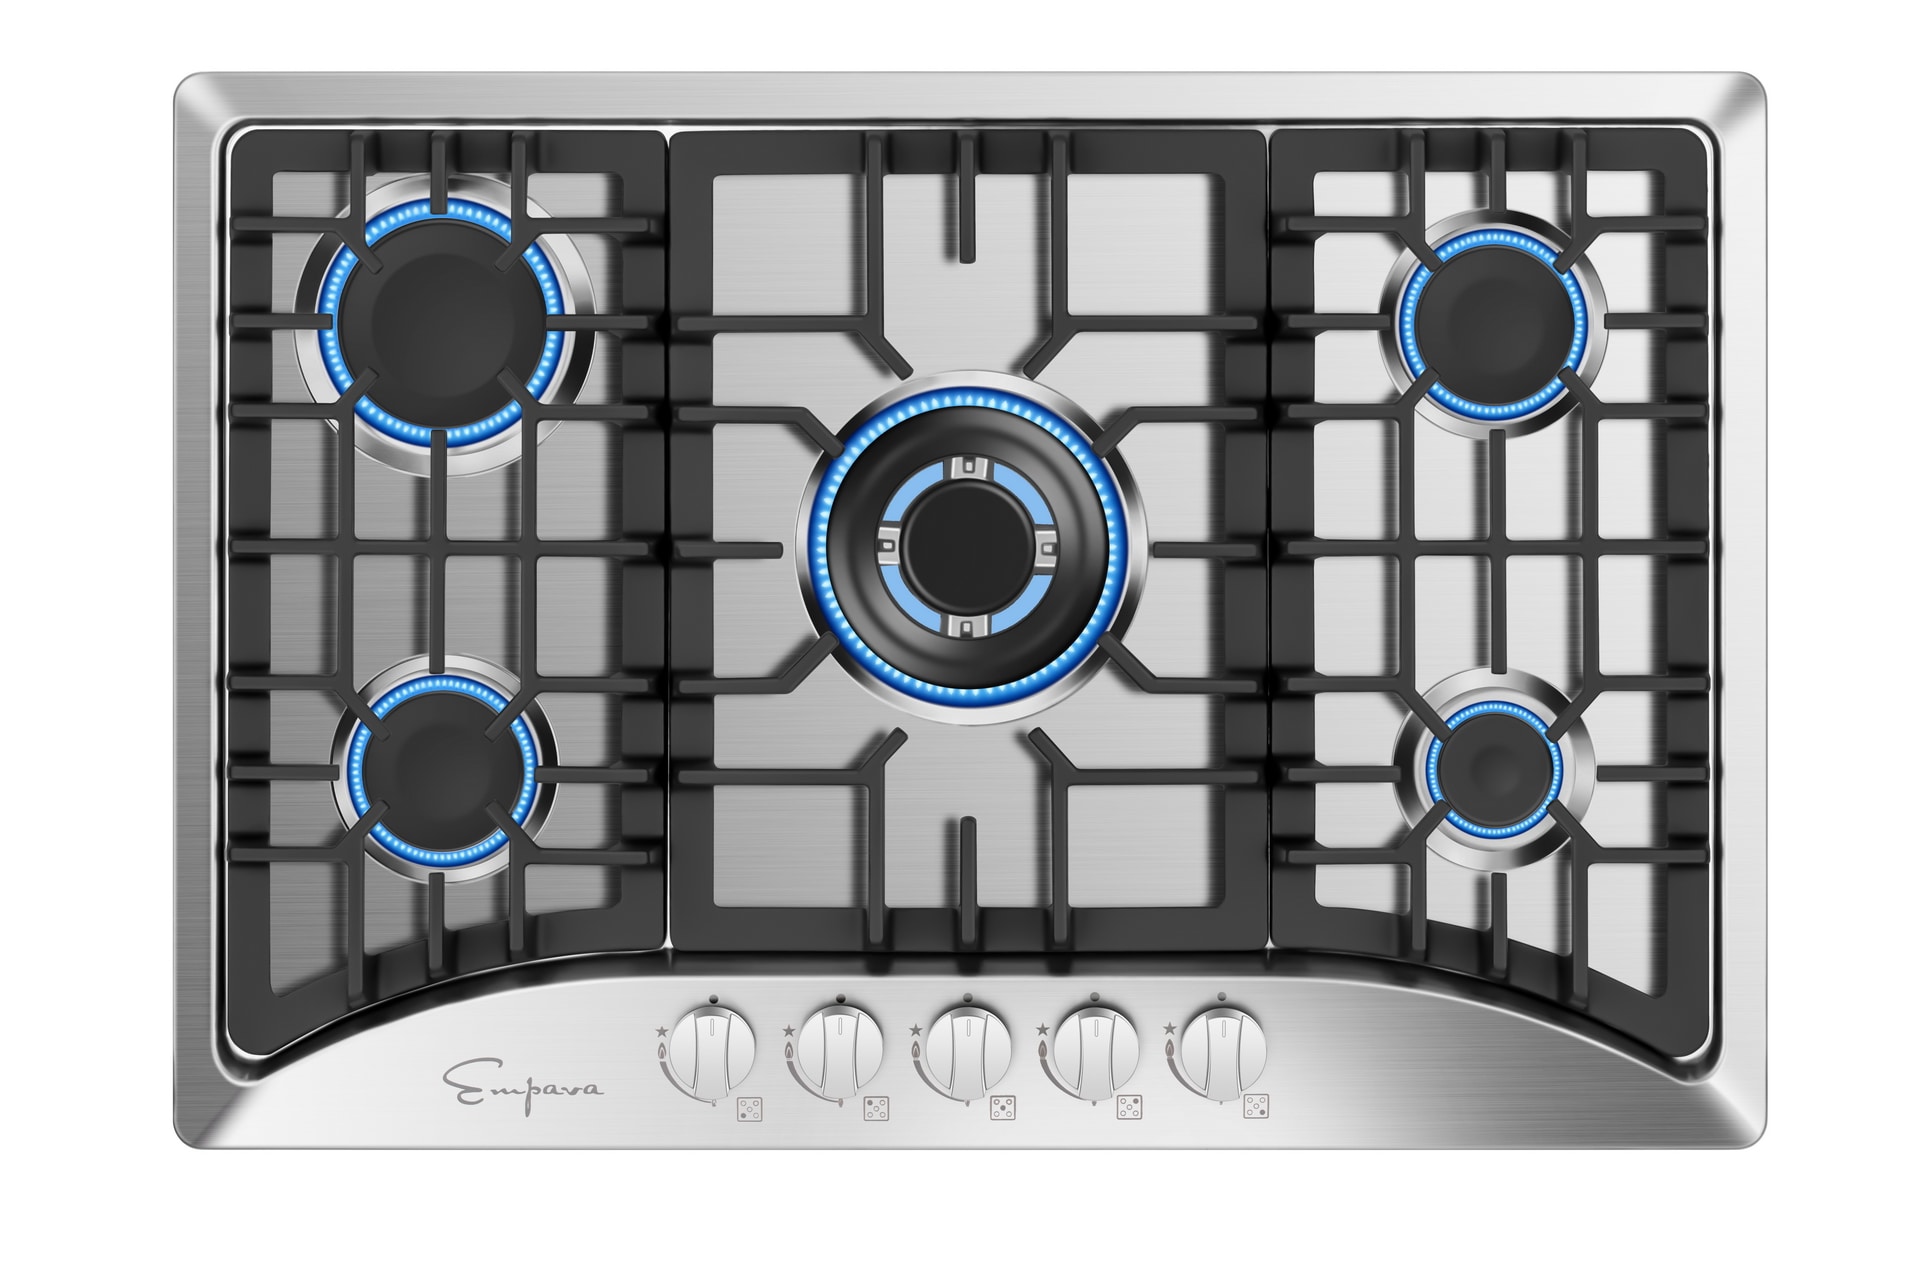 Deli-Kit DK245-B03 24 inch 4 Burners gas cooktop gas hob stovetop gas stove LPG/NG Dual Fuel 4 Sealed Burners brass burner Stainless Steel gas cooktop 4 burners Built-In gas hob 110V AC pulse ignition 